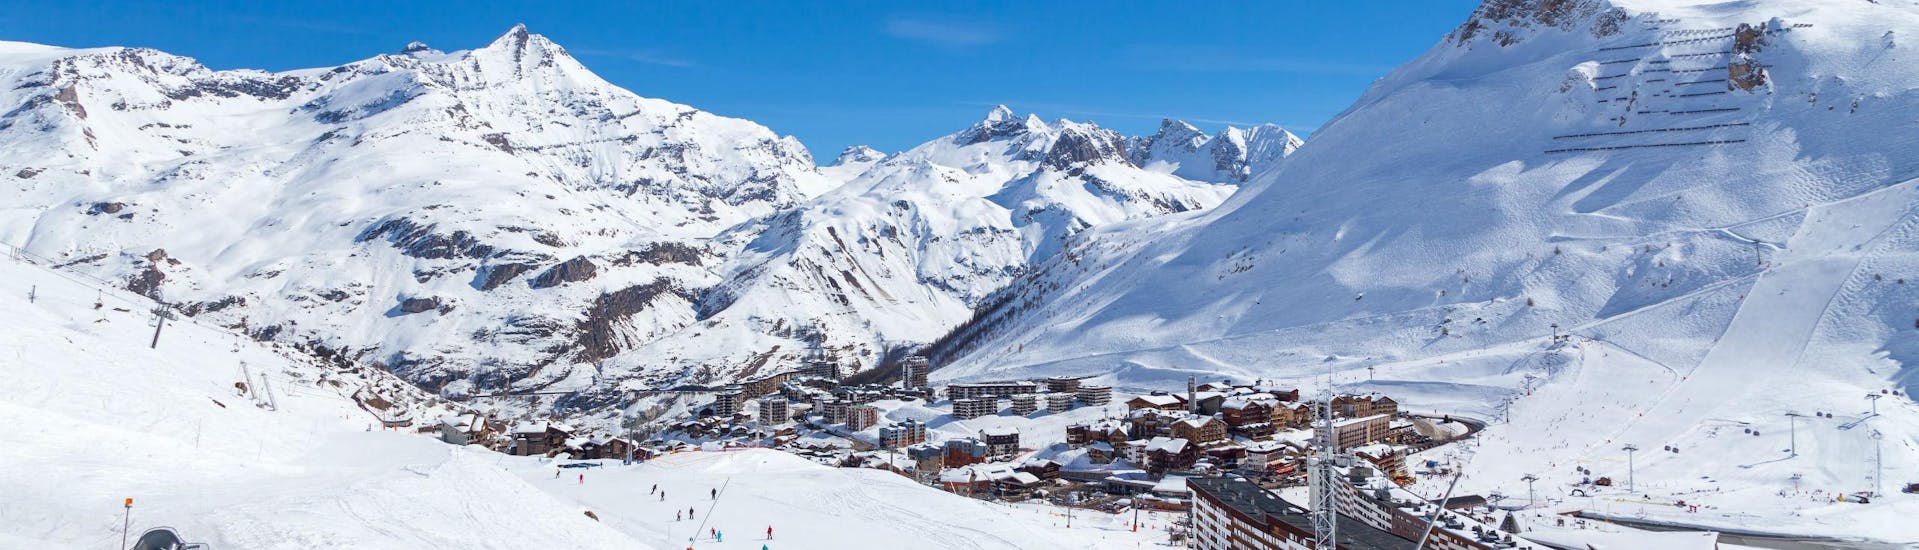 A view of the French ski resort of Tignes under the clear blue sky with its many pistes used by the local ski schools to carry out their ski lessons.